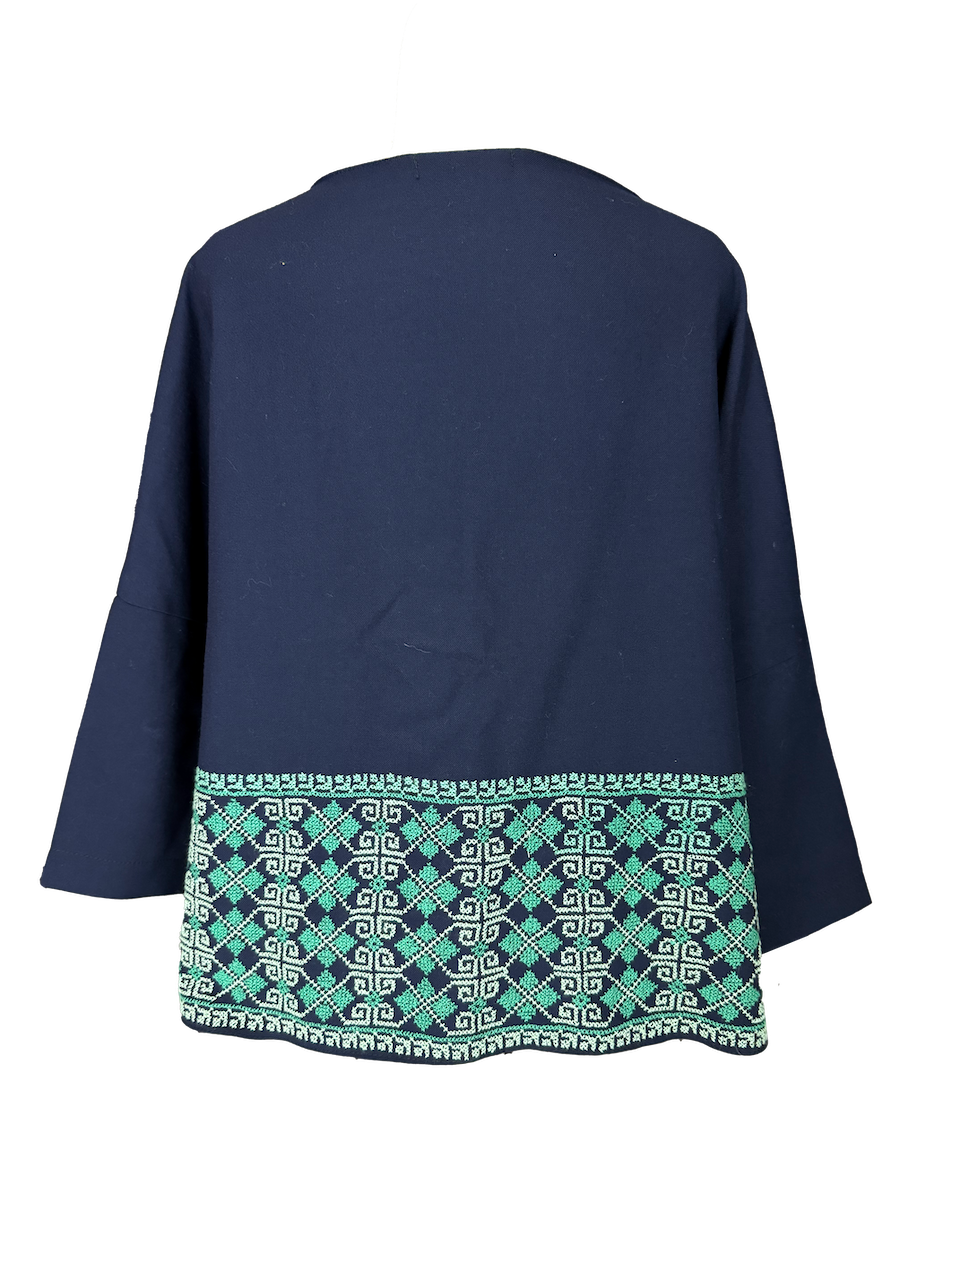 The Heavily Embroidered Boxy in Navy Blue